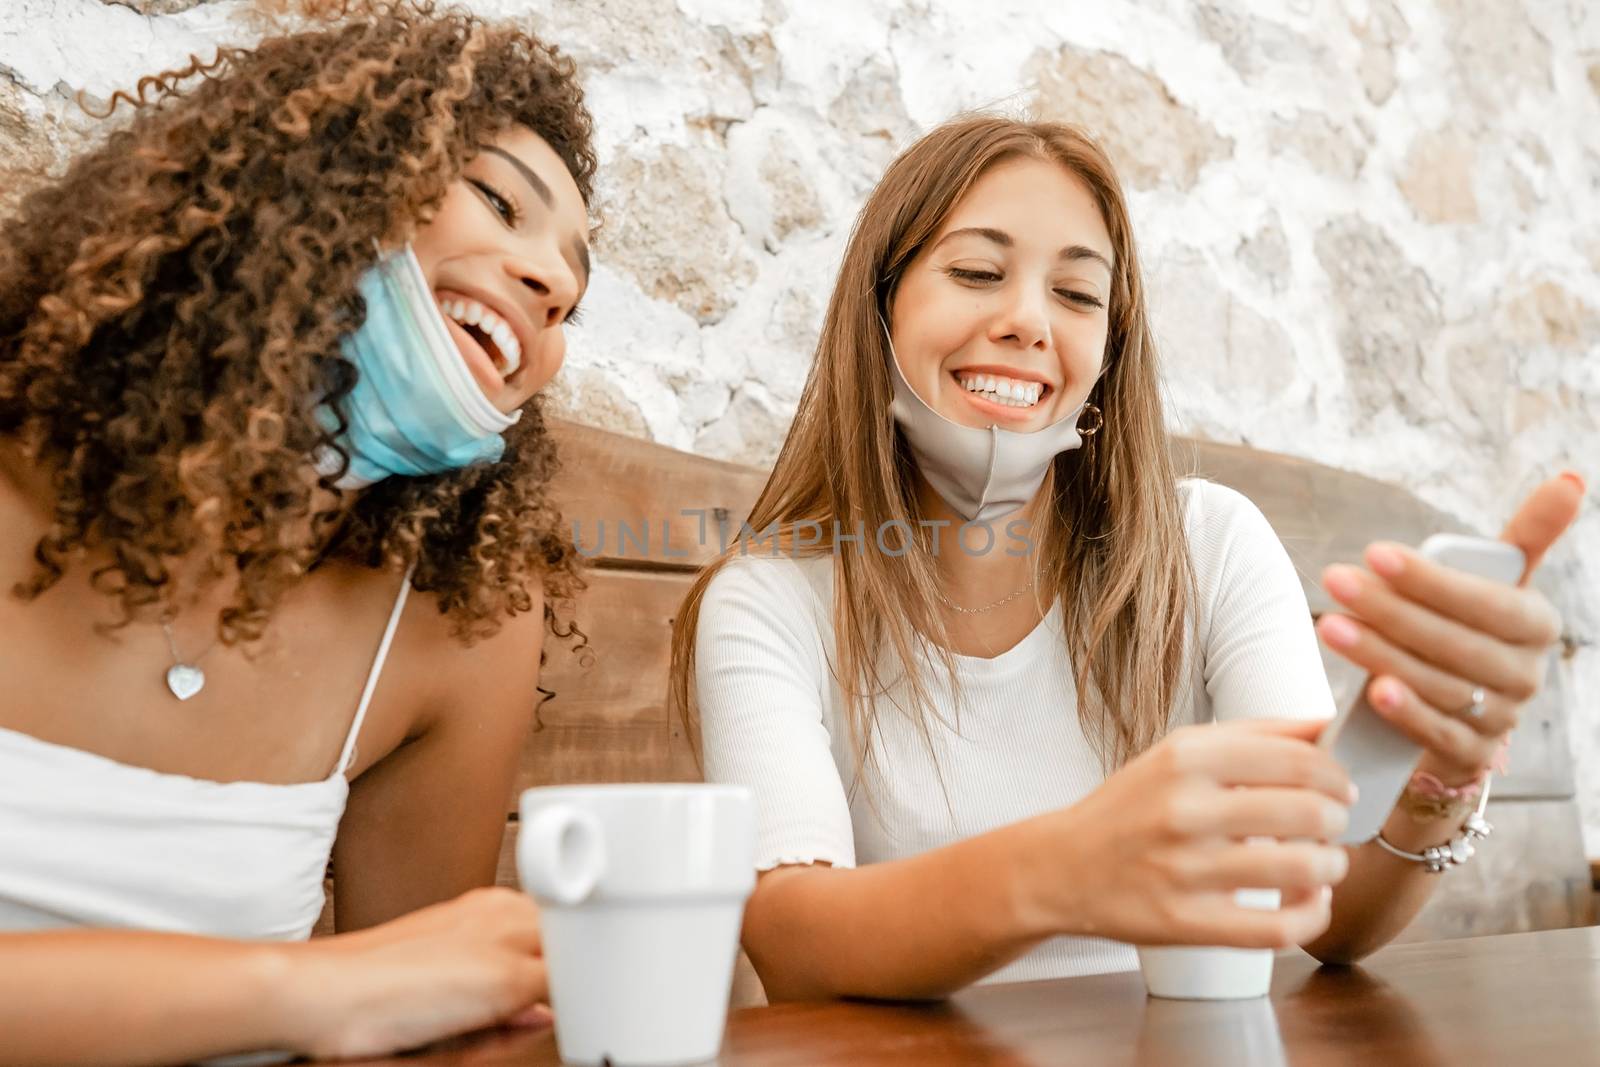 Lifestyle concept, work from home to reinvent your life: two young women, hispanic and caucasian, sitting on a table using a laptop with medical mask protection - New normal job activity by robbyfontanesi